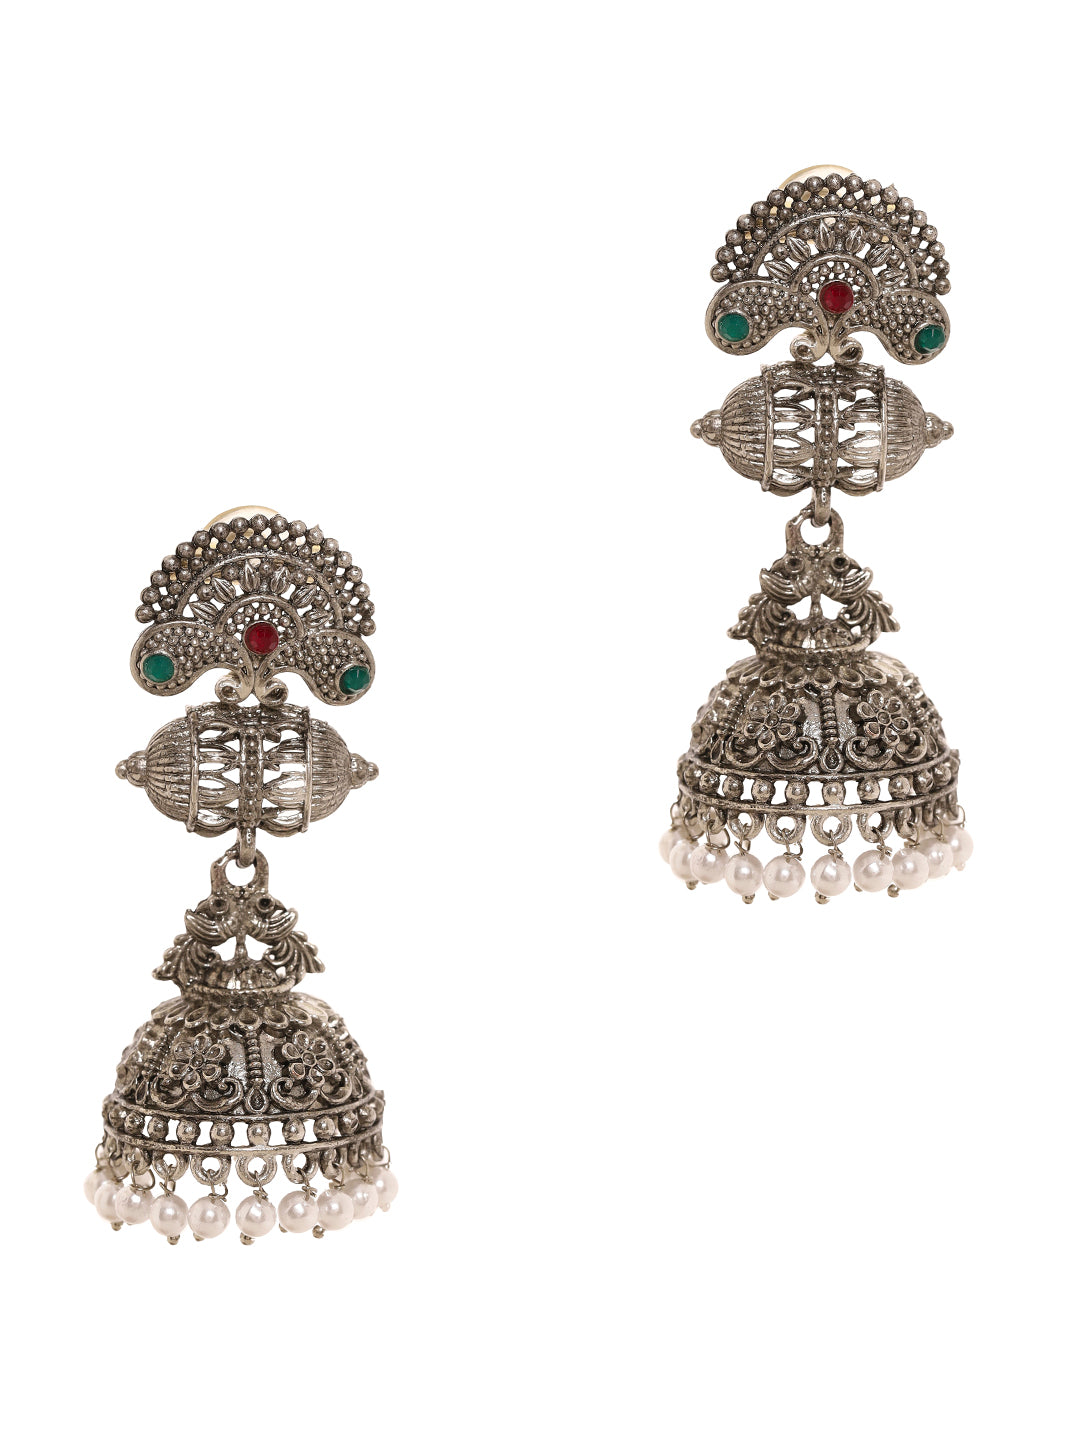 Priyaasi Harmony in Heritage with Tribal and Floral Jhumkas